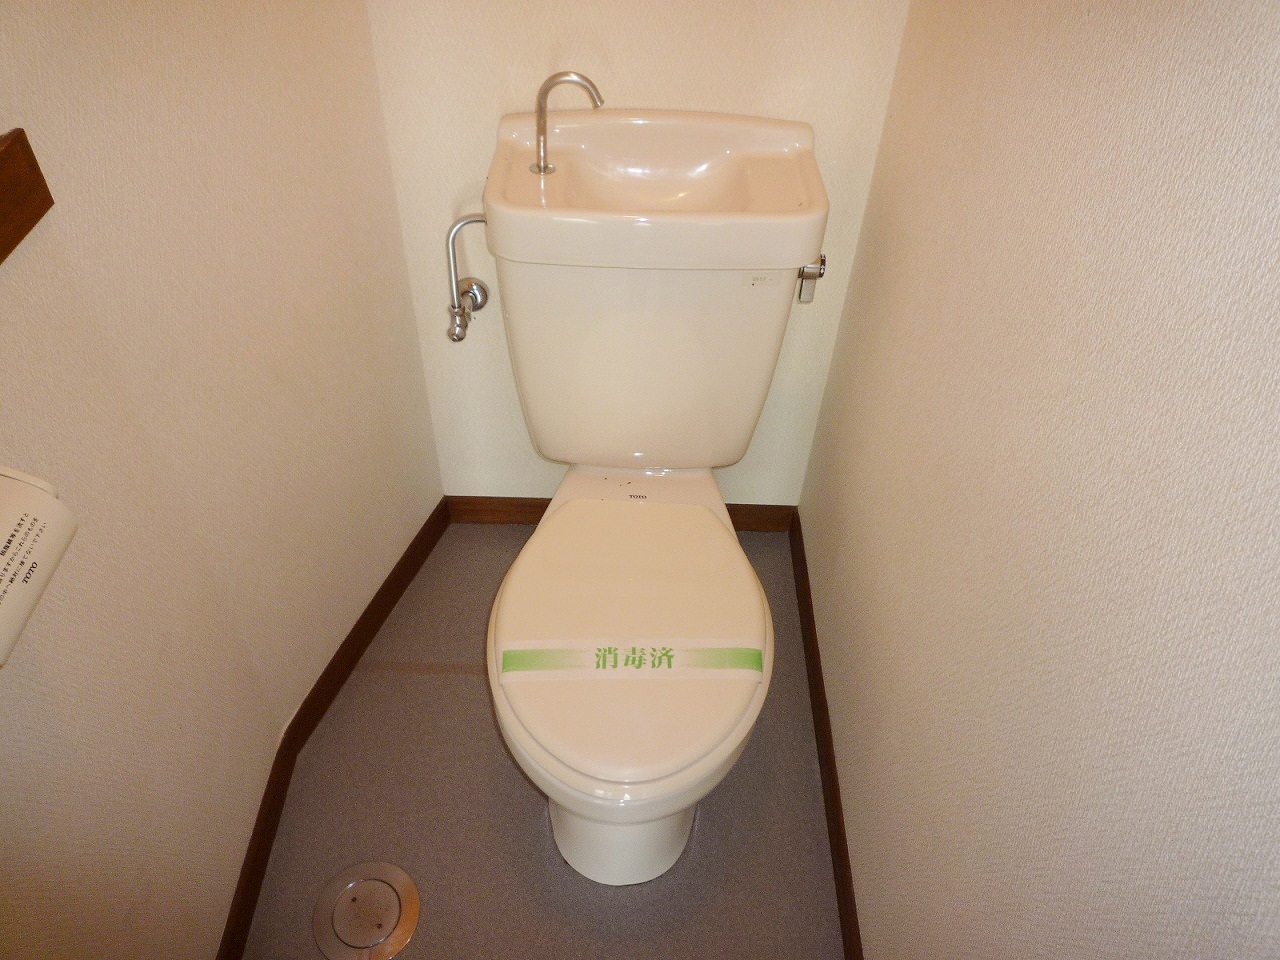 Toilet. Of course, it is Western-style toilet!